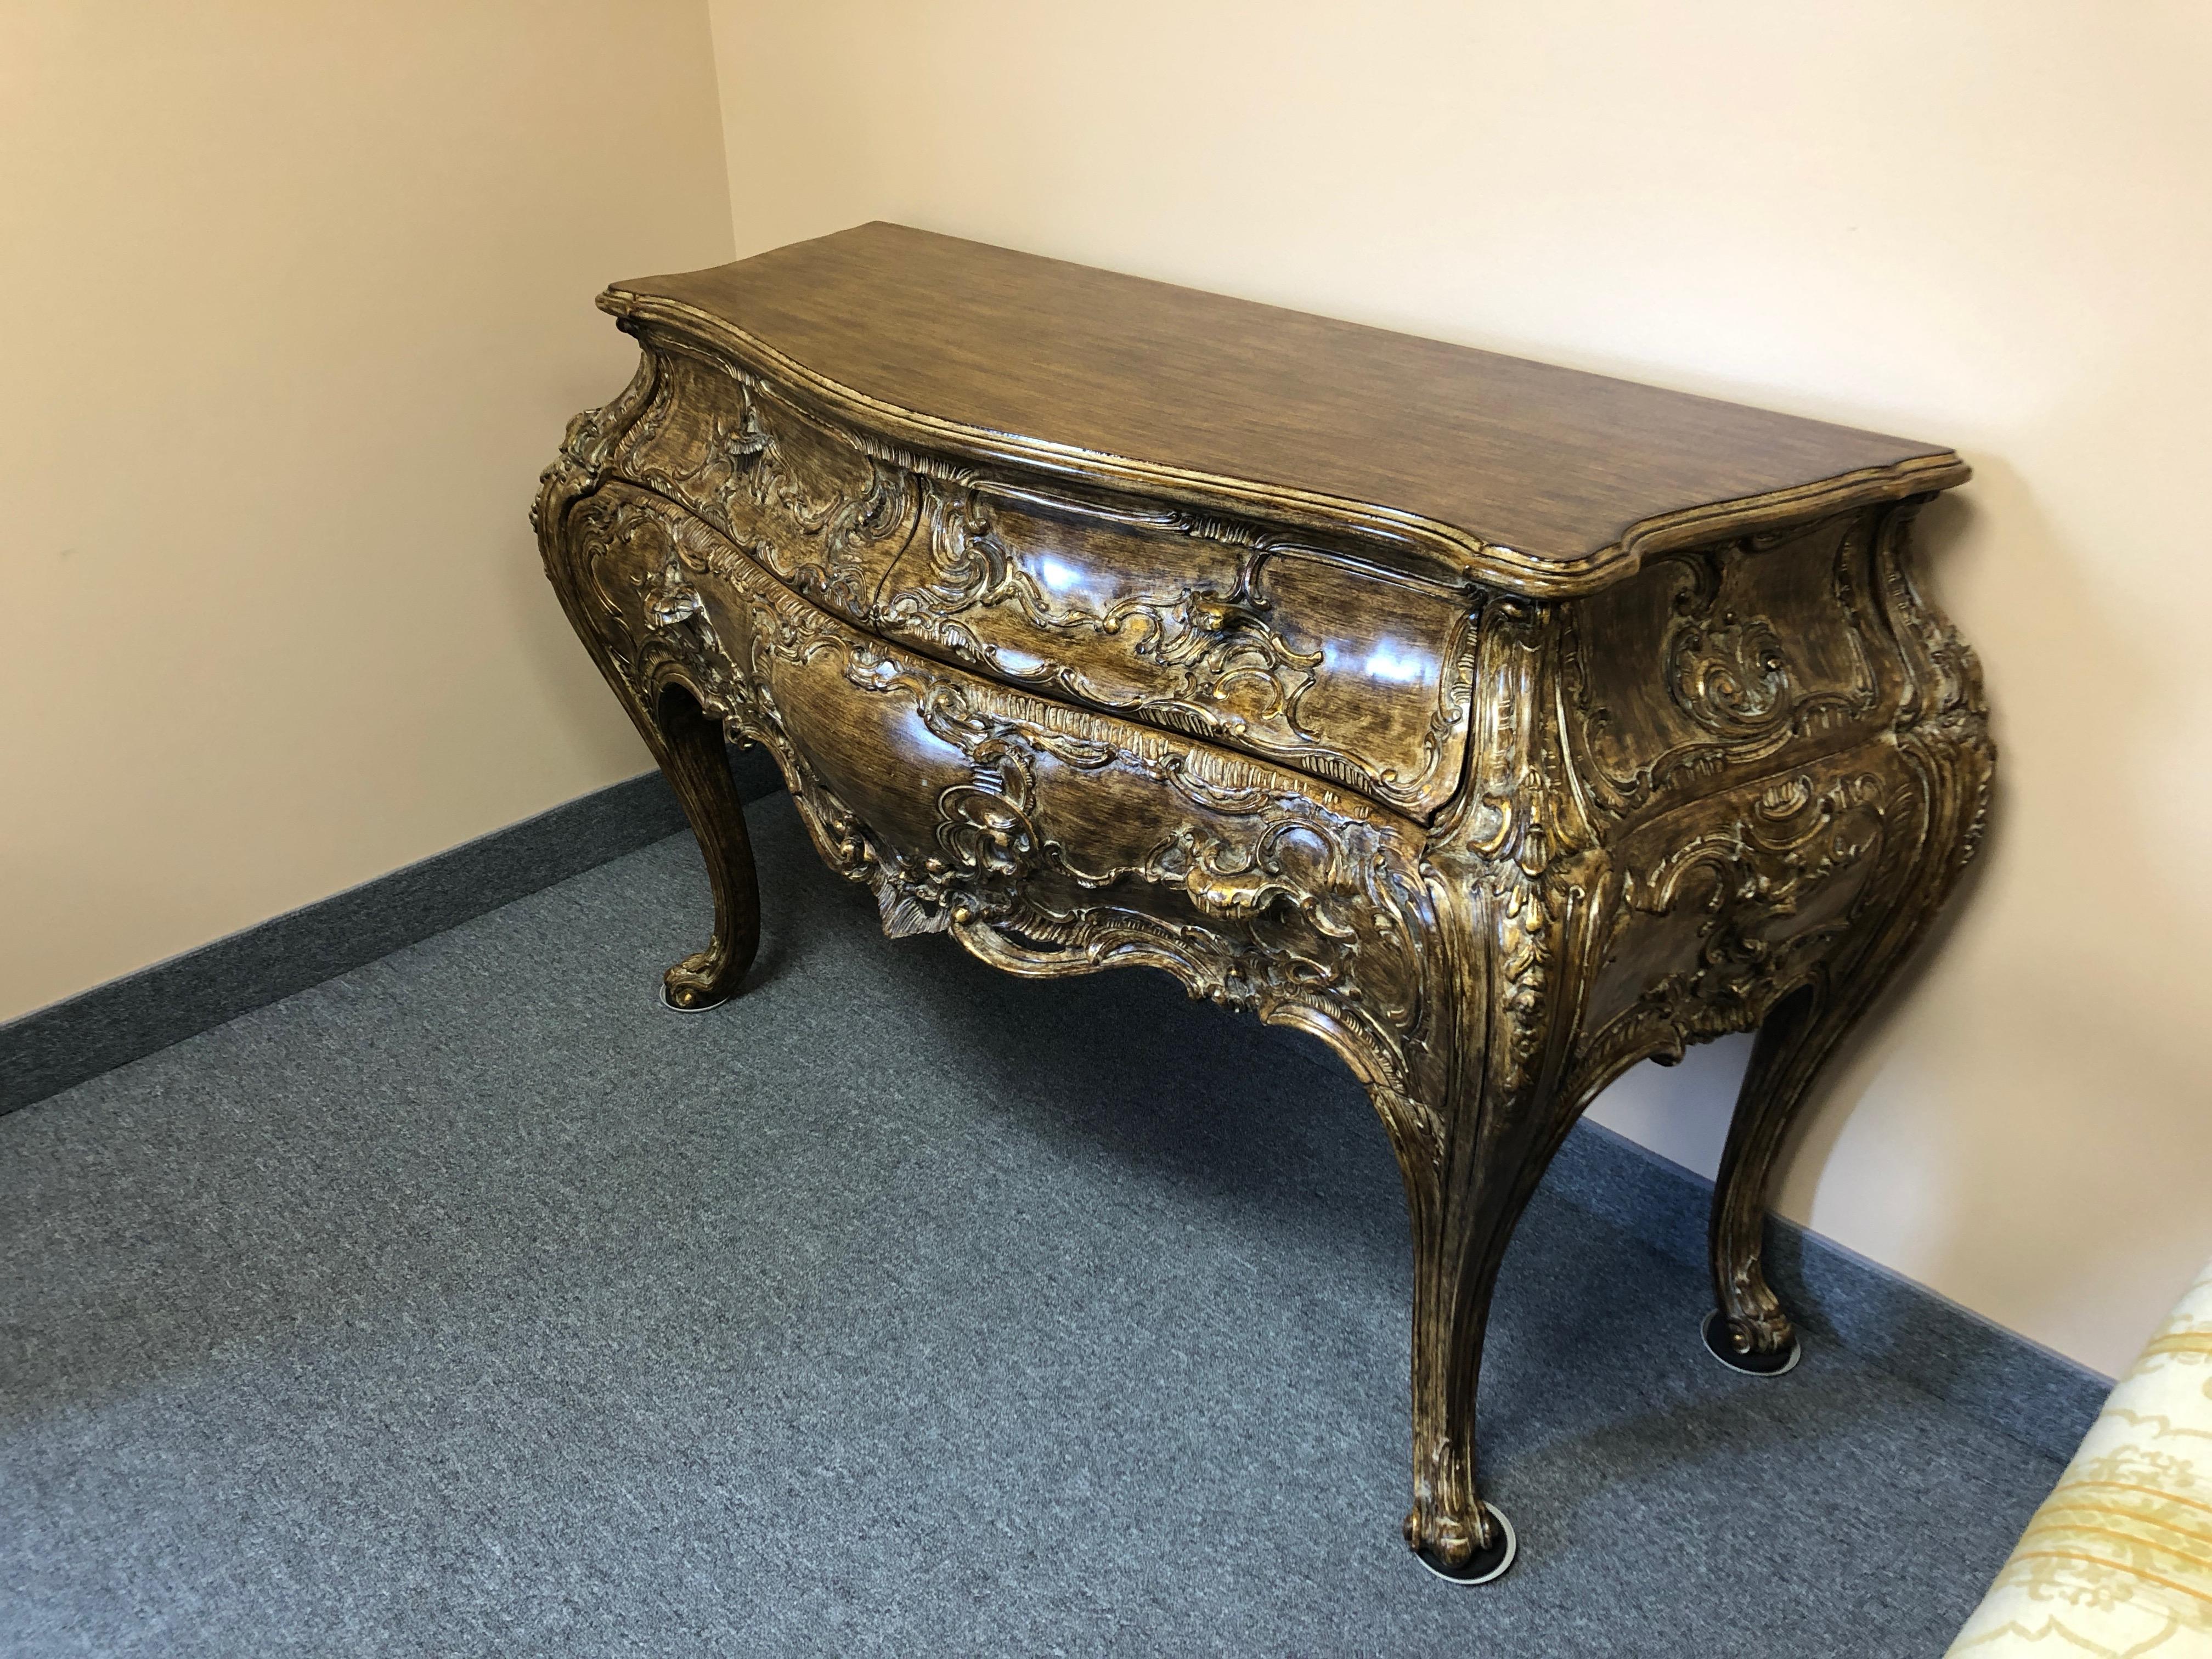 Very dramatic gilt finish ornately carved Rococo commode having handles that are sculpted parts of the drawer fascades. Curved cabriole legs and hand painted finish with two smaller drawers on top of one large drawer.